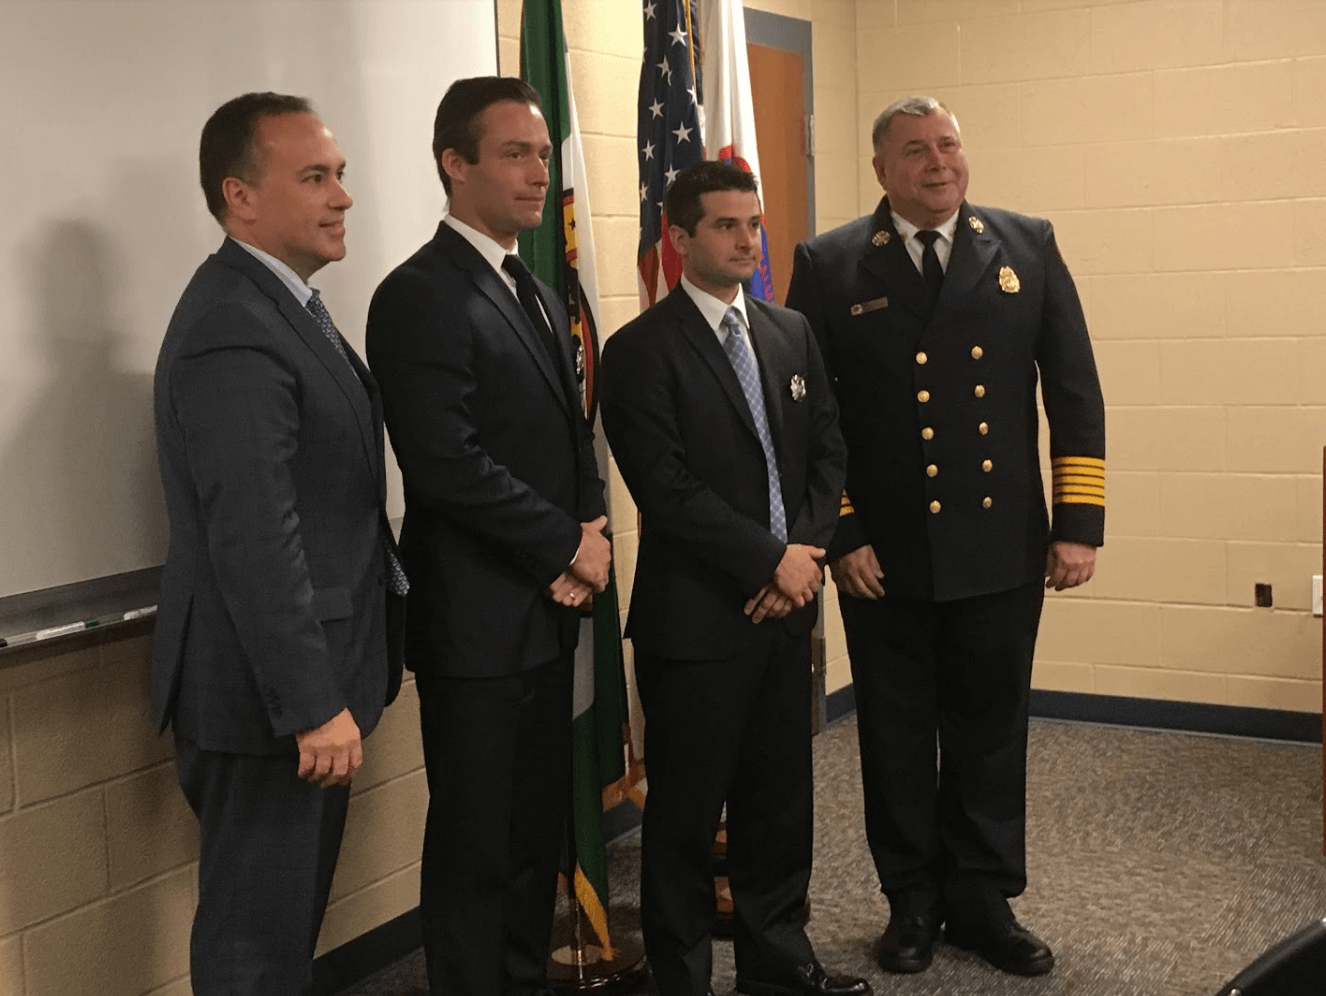 From left to right First selectman Peter Tesei, New inductees Adam Corwin and Frank O’connor, and Fire Chief Peter Siecienski